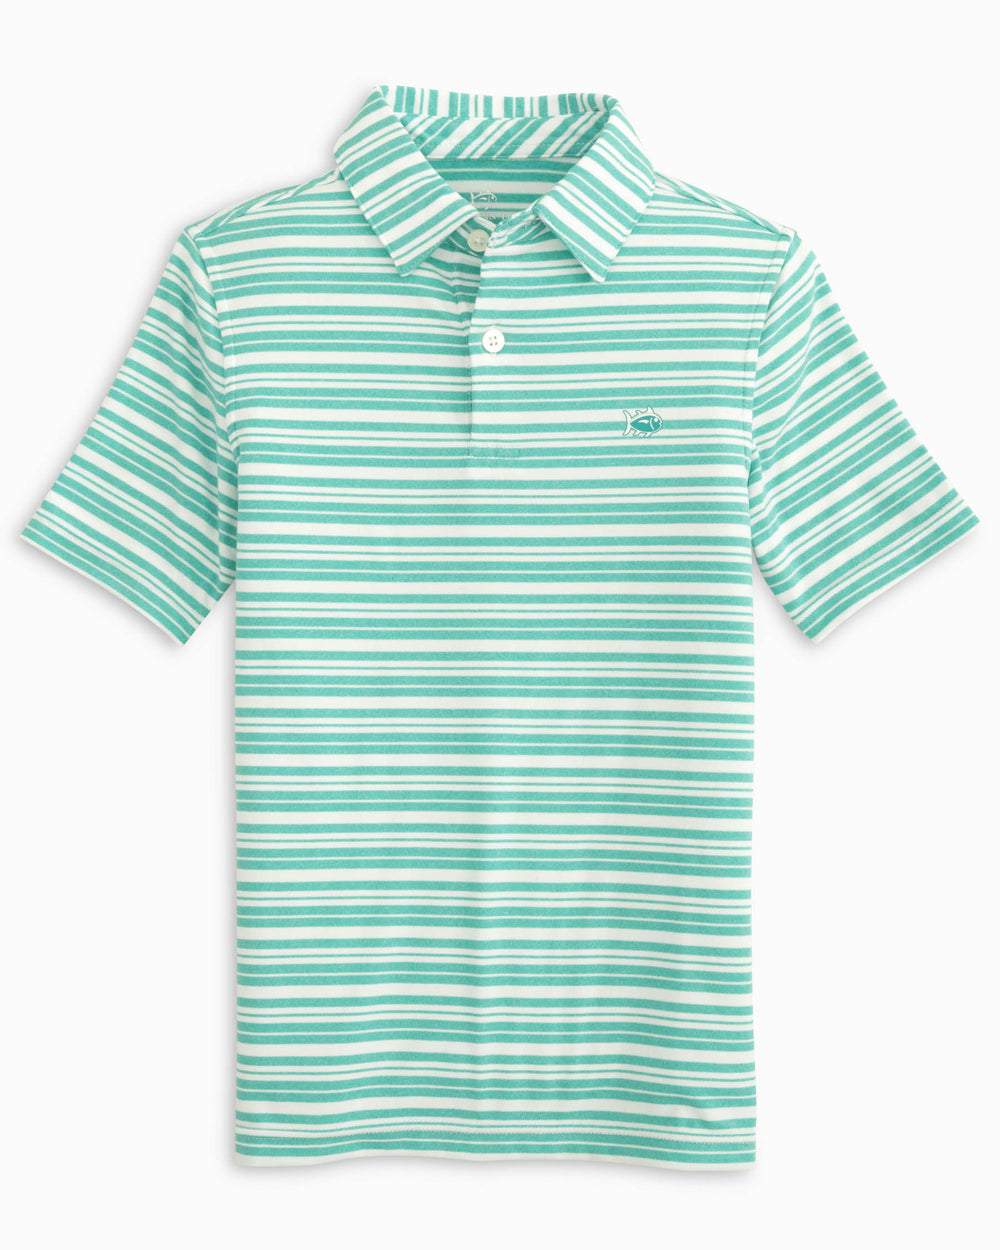 The front view of the Southern Tide Youth Ryder Heather Bombay Stripe Performance Polo Shirt by Southern Tide - Heather Tidal Wave